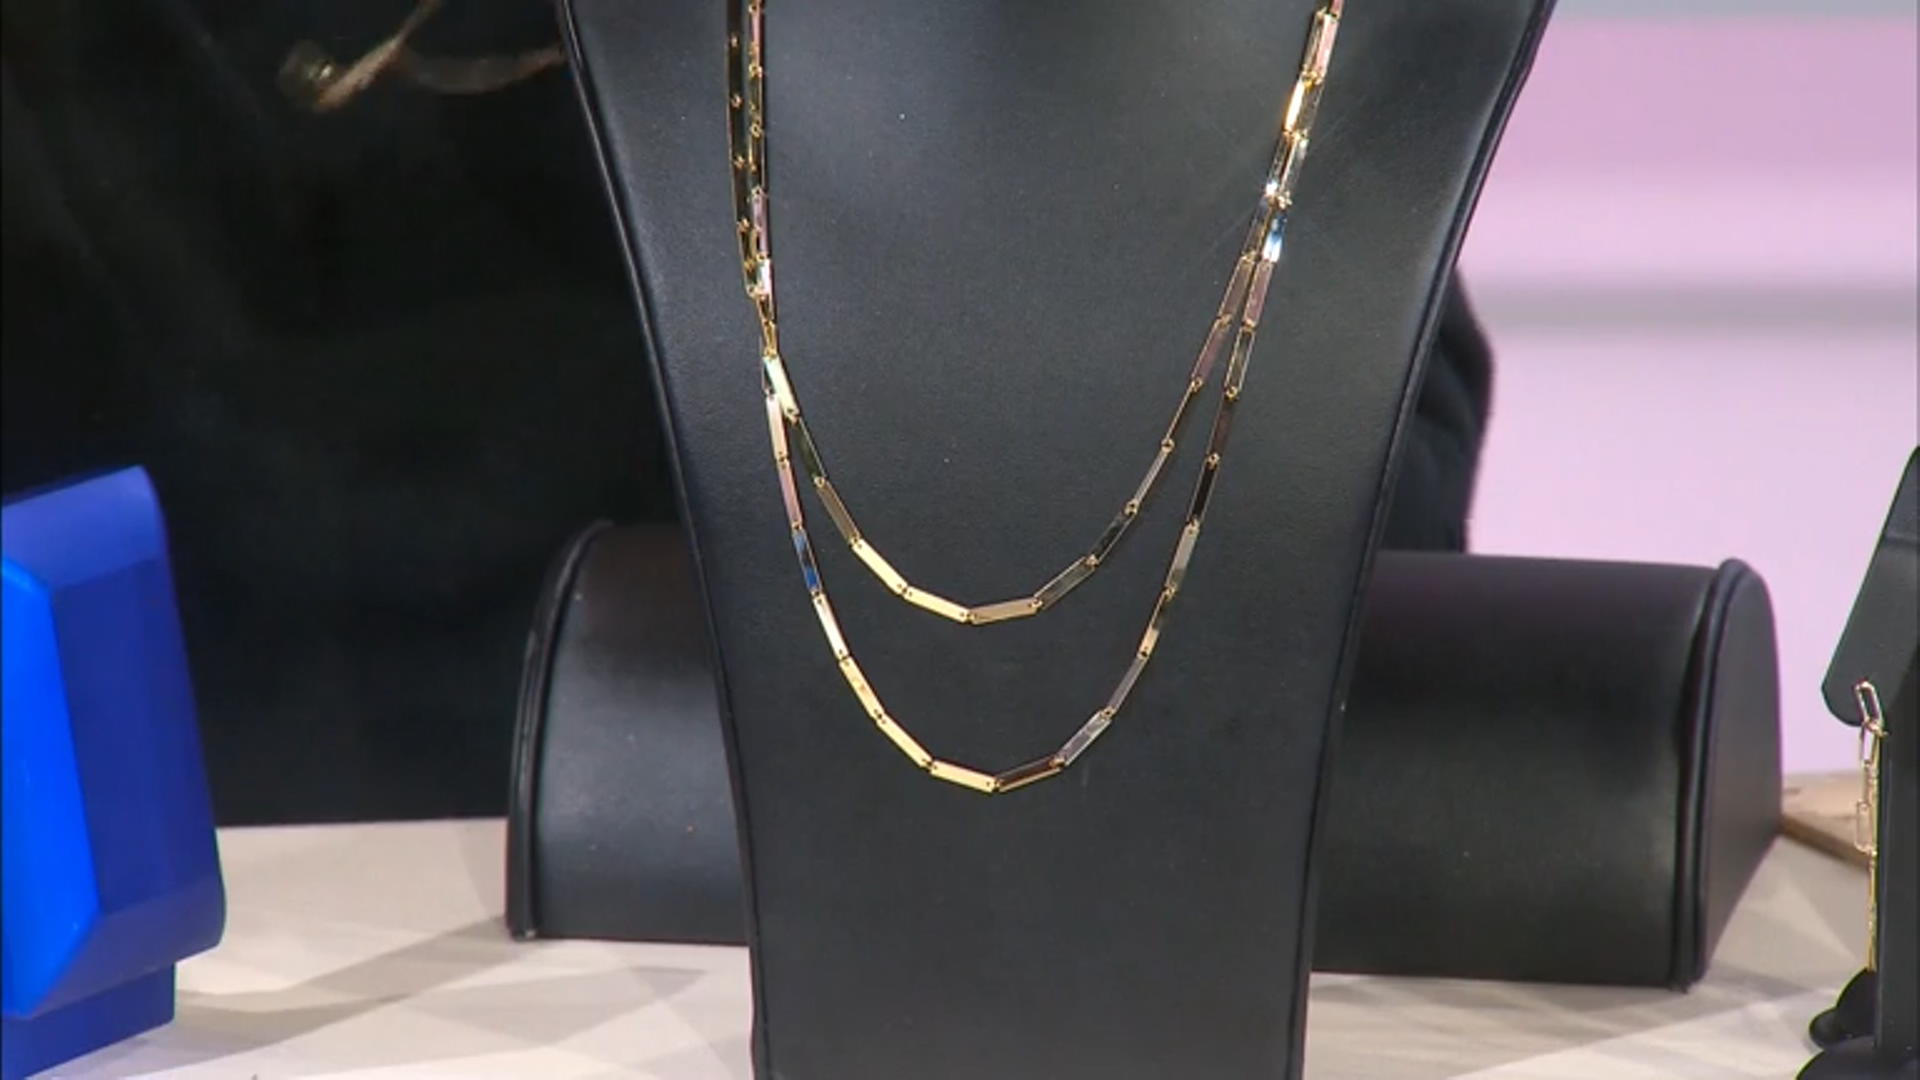 10k Yellow Gold Bar Link 20 Inch Necklace Video Thumbnail